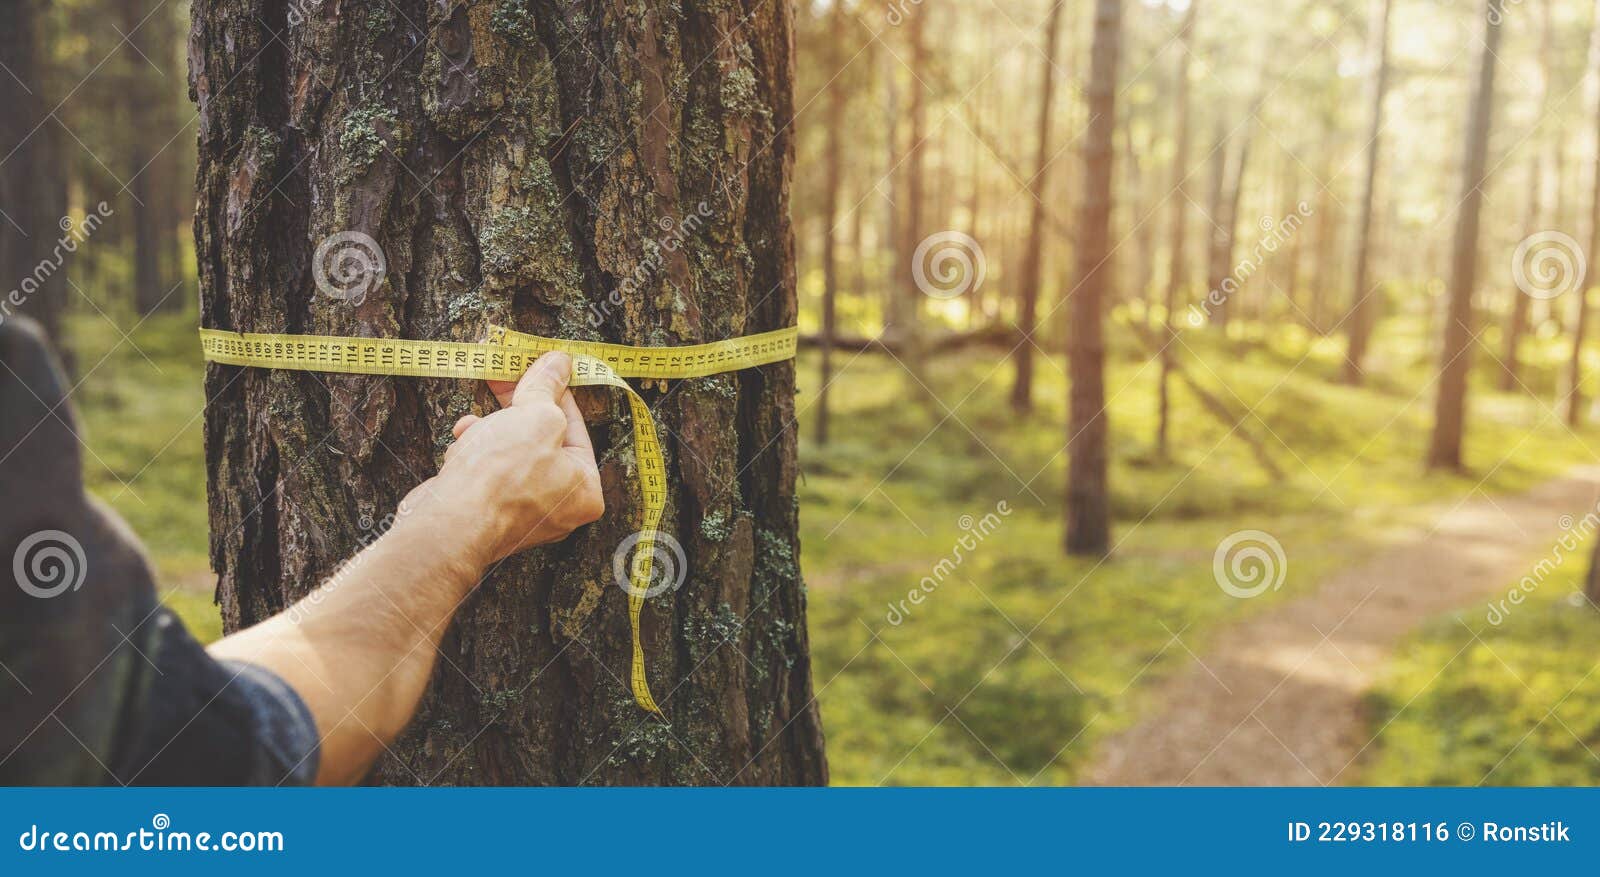 deforestation and forest valuation - man measuring the circumference of a pine tree with a ruler tape. copy space